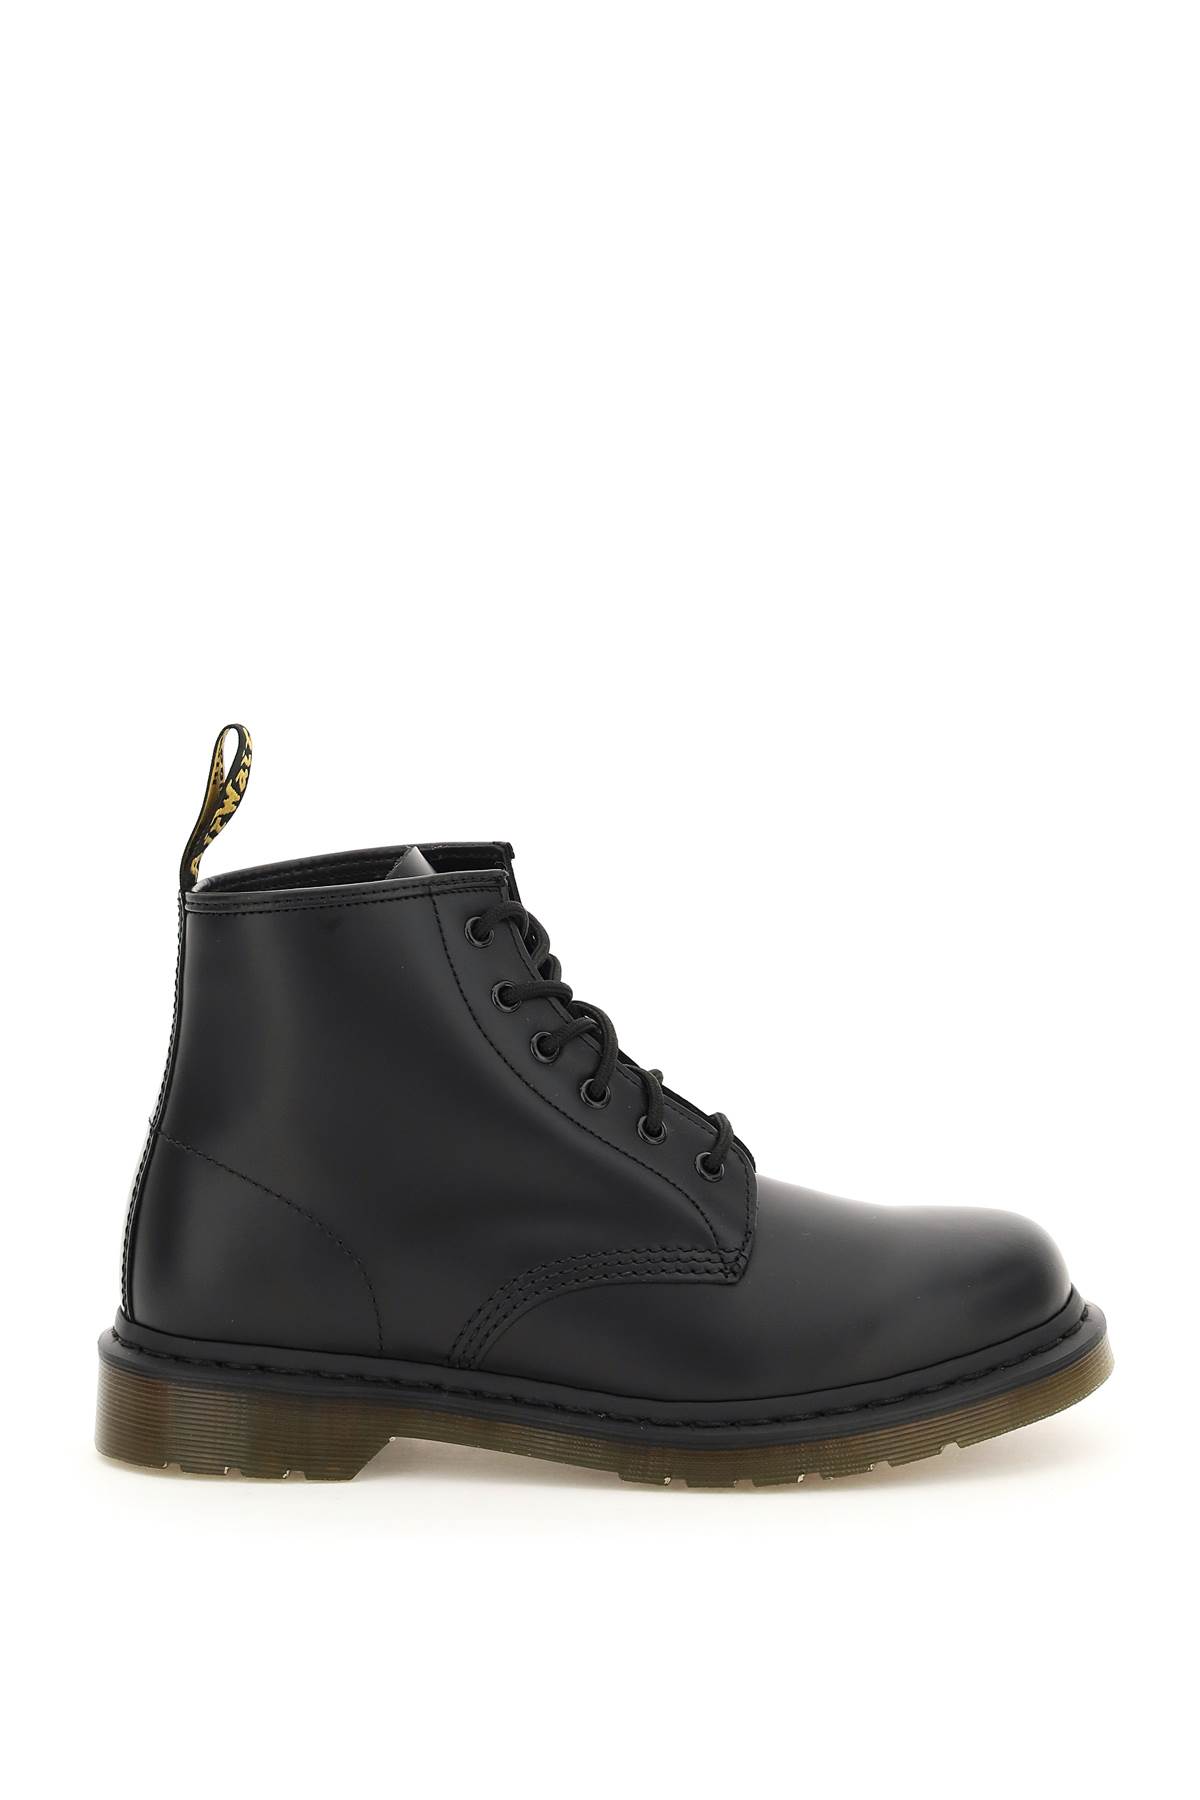 Dr. Martens 101 Smooth Lace-up Combat Boots